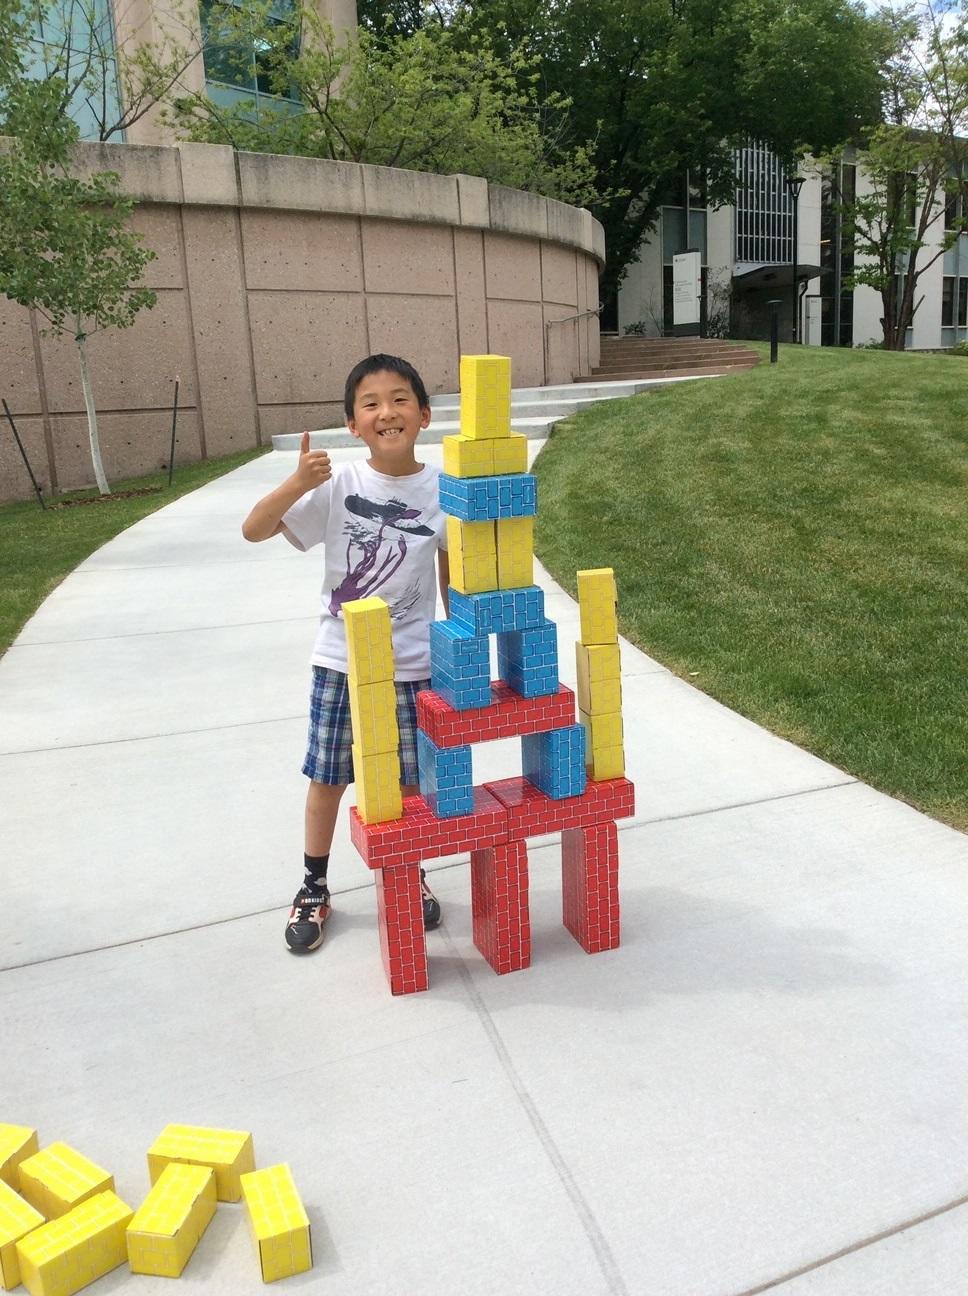 Young man playing with large blocks outdoors in summer camp